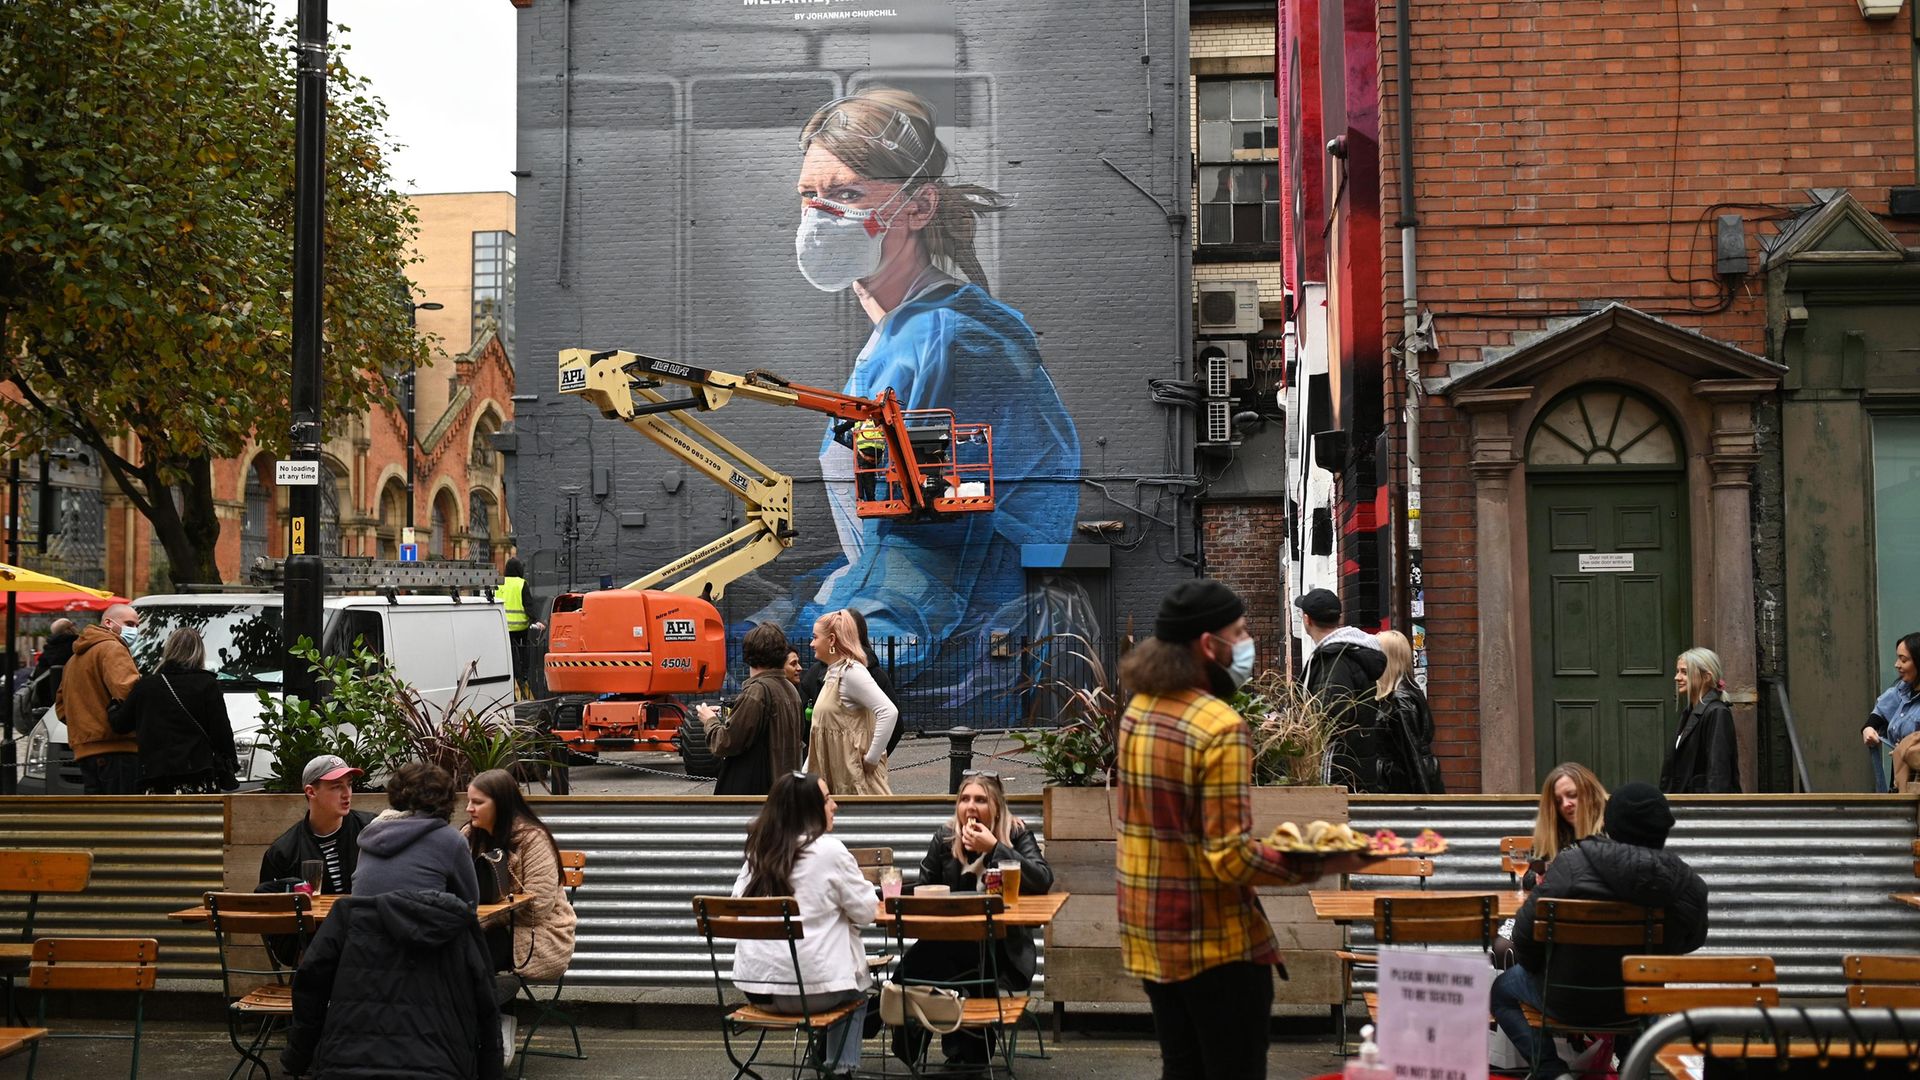 People enjoy a socially-distanced drink as an artist creates a mural of a NHS worker on a wall in north Manchester. - Credit: AFP via Getty Images